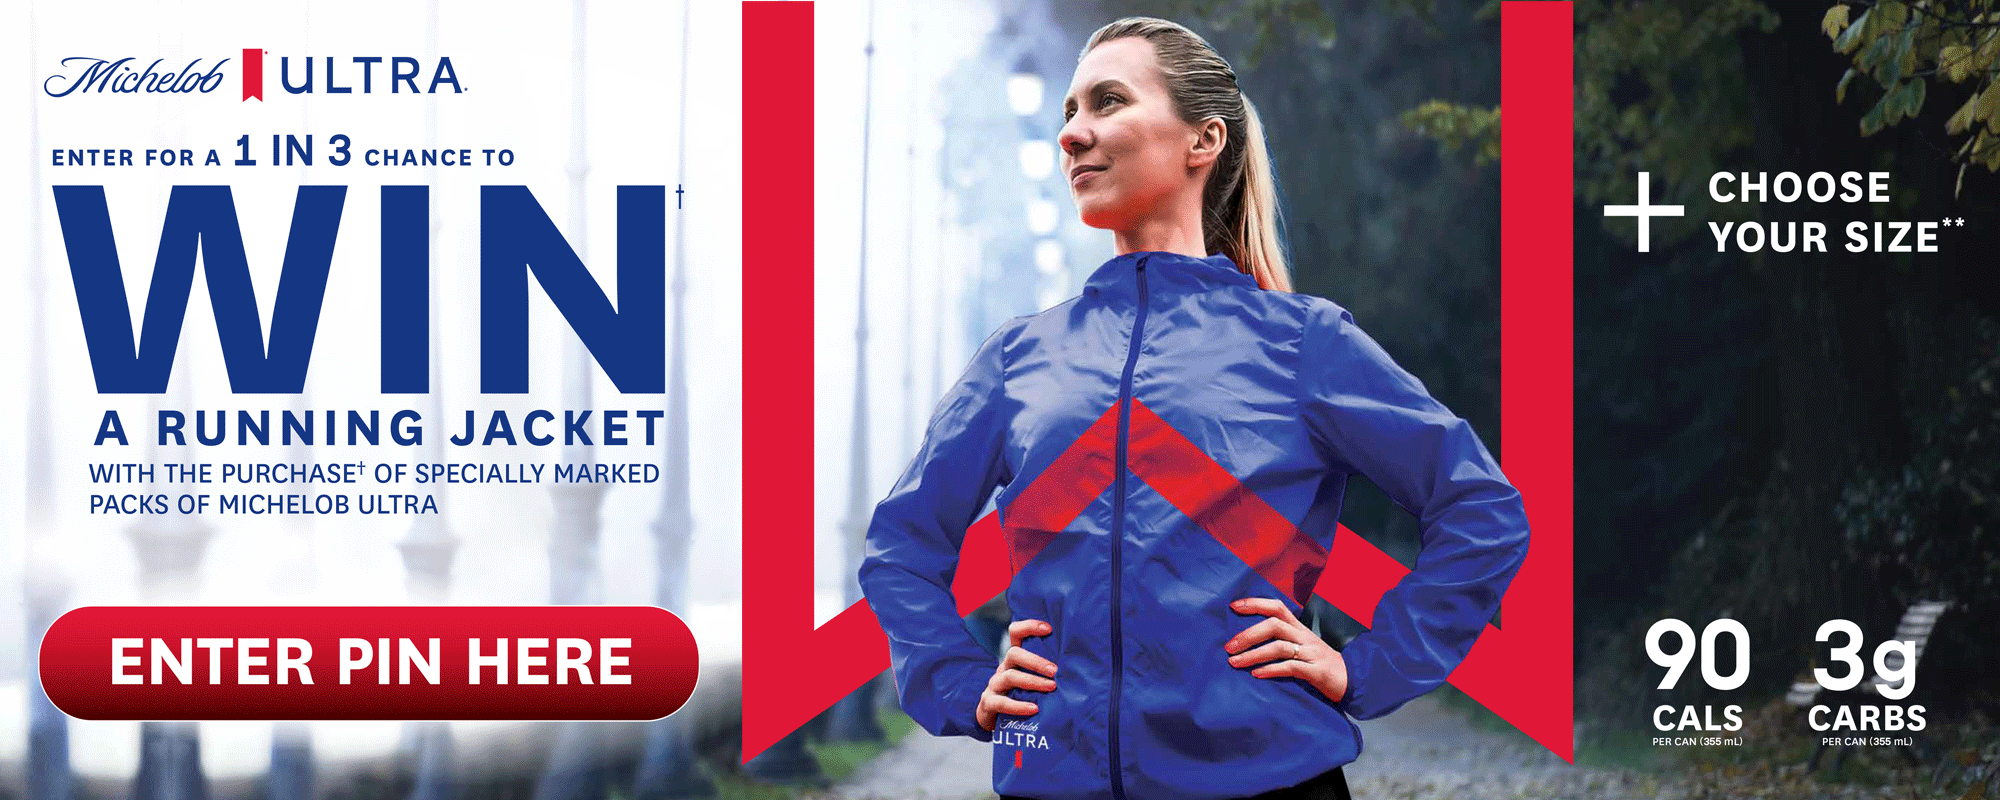 Enter to win a Michelob Ultra running jacket